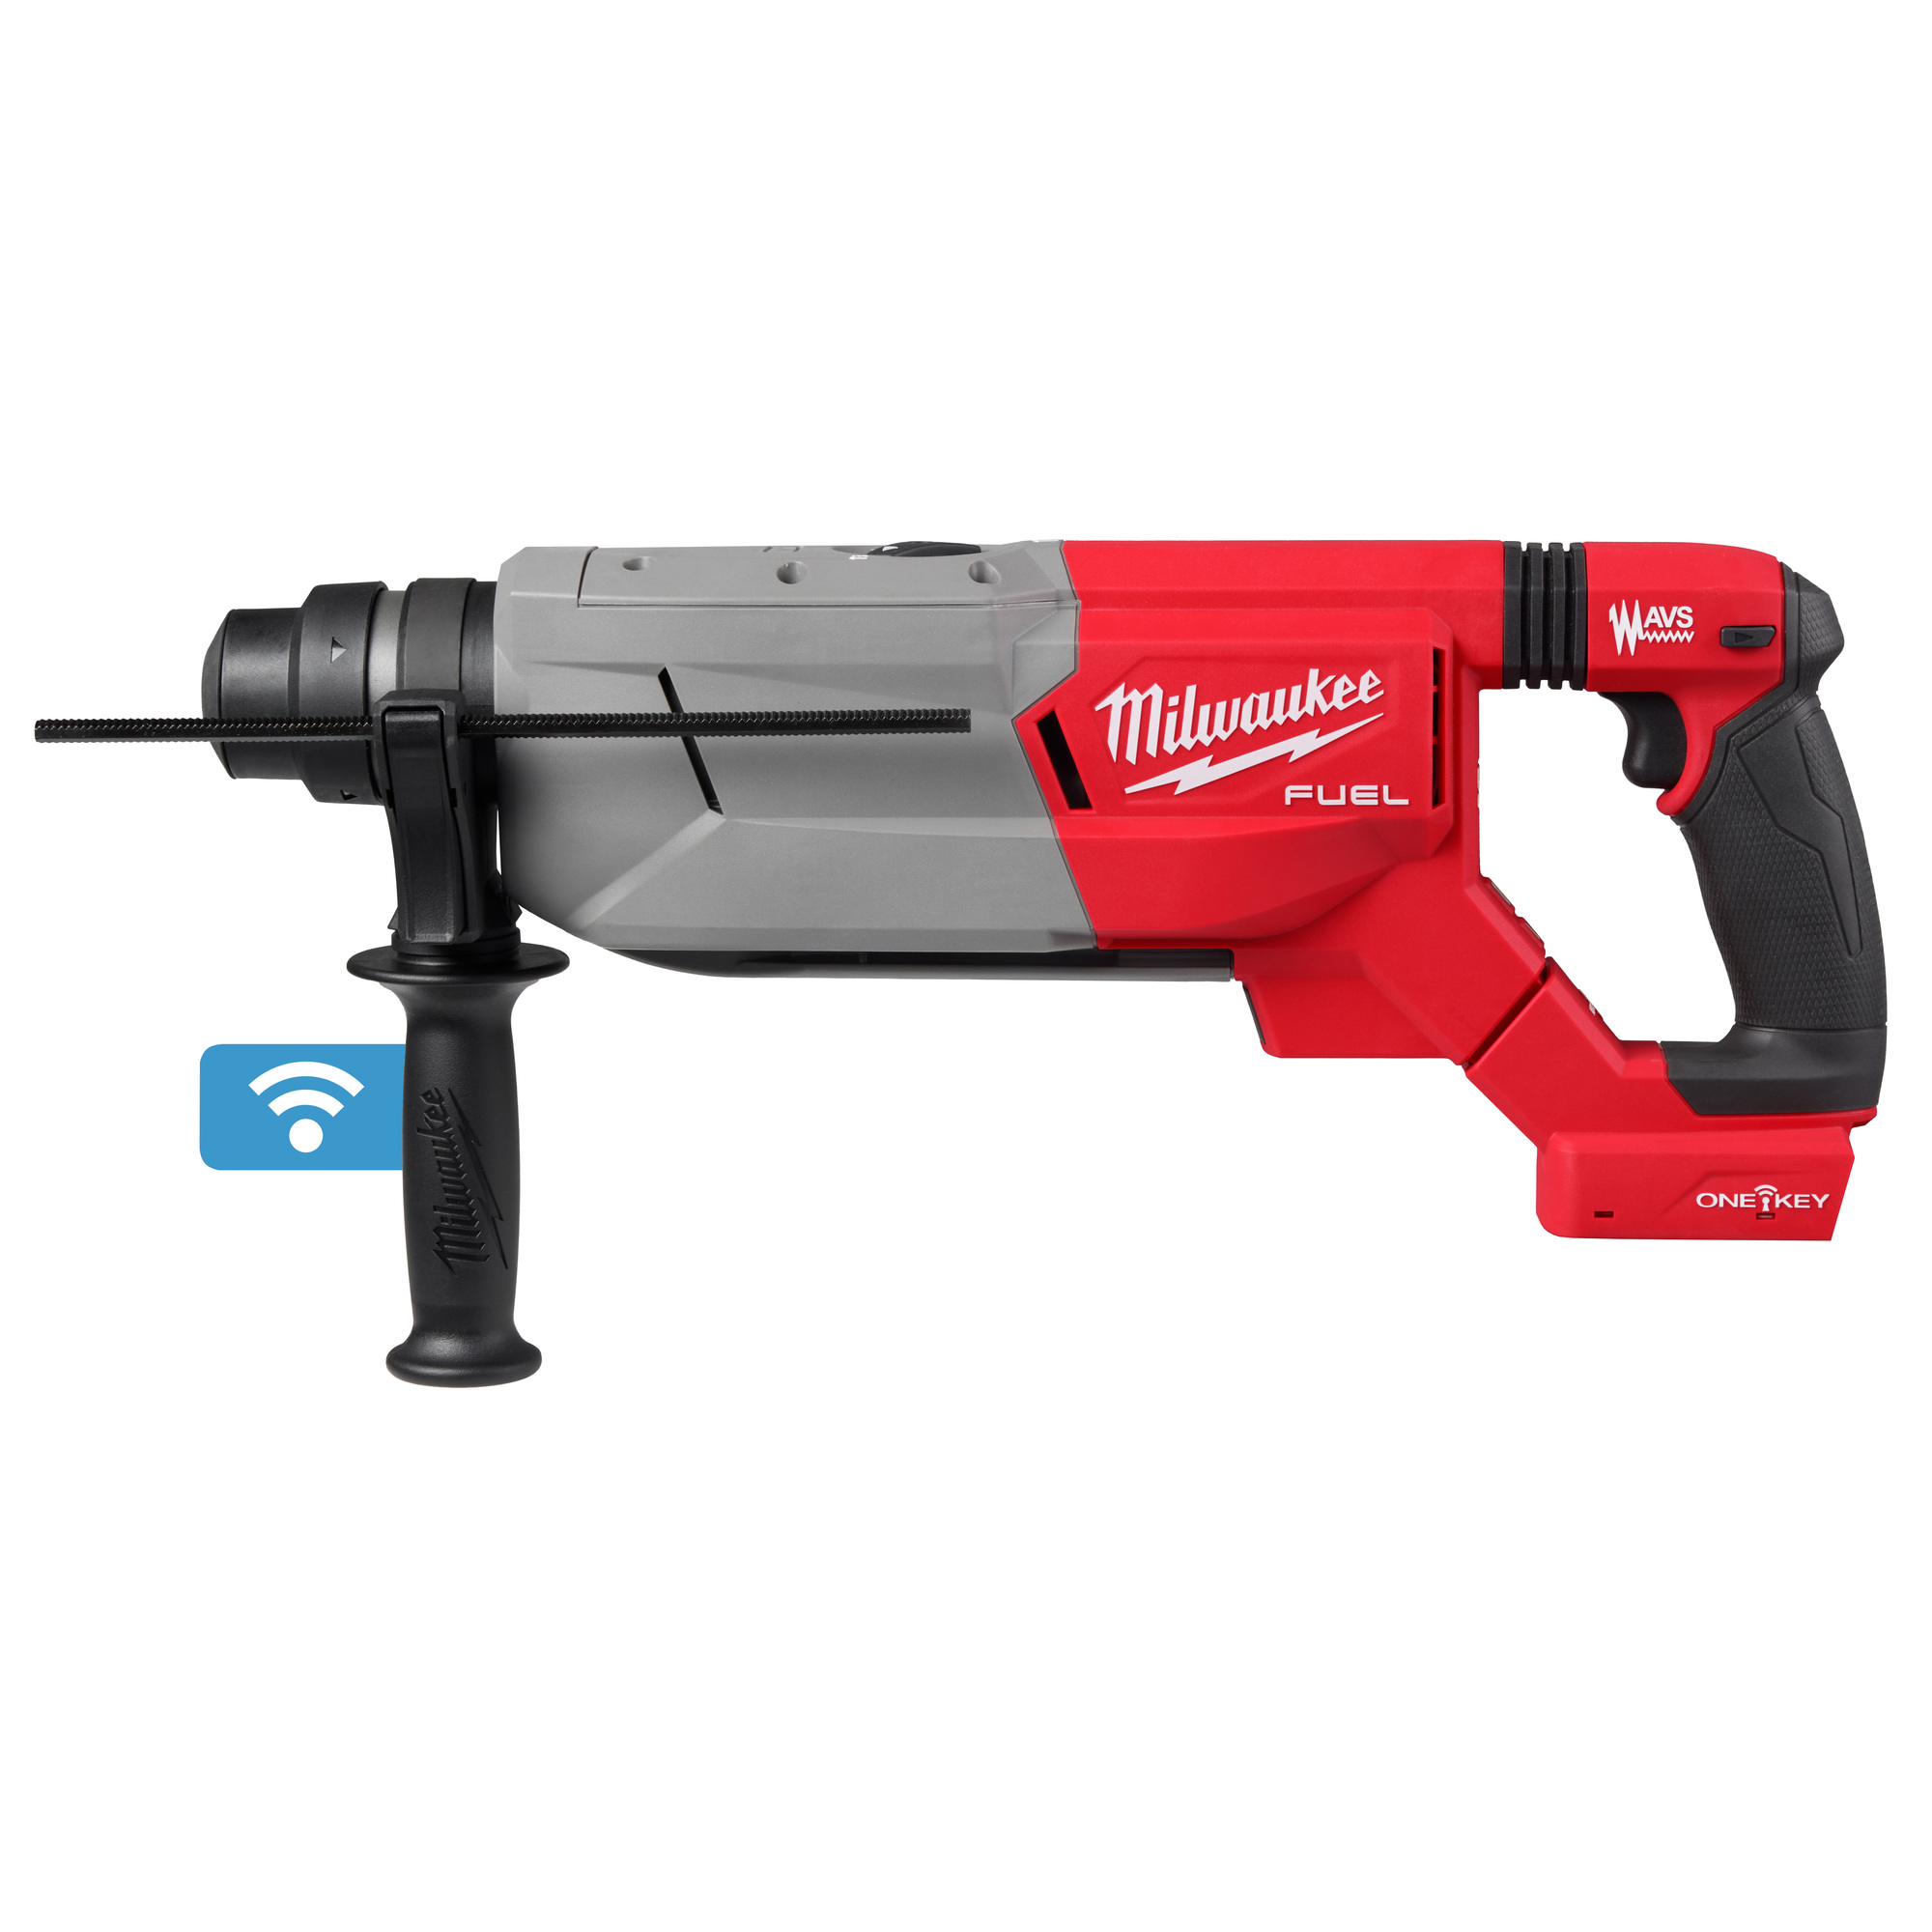 Milwaukee, 1-1/4Inch SDS PLUS ROTARY HAMMER BARE TOOL, Chuck Size 1-1/4 in, Max. RPM 810, Max. Blows Per Minute 4650, Model 2916-20